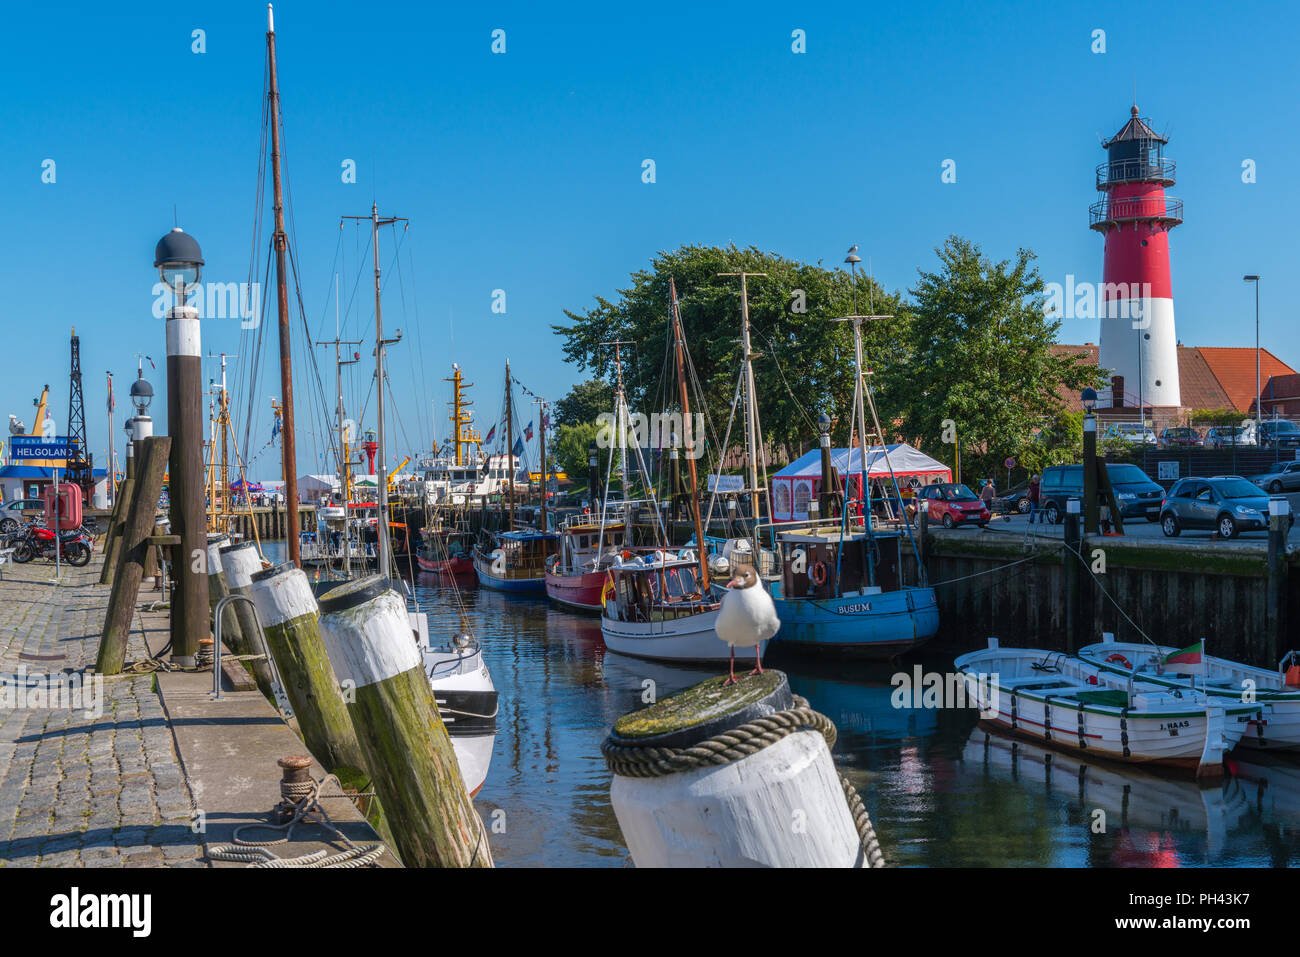 Habour scene with fishing boats, lighthouse, holiday resort, Büsum, Dithmarschen, Schleswig-Holstein, Germany, Europe Stock Photo